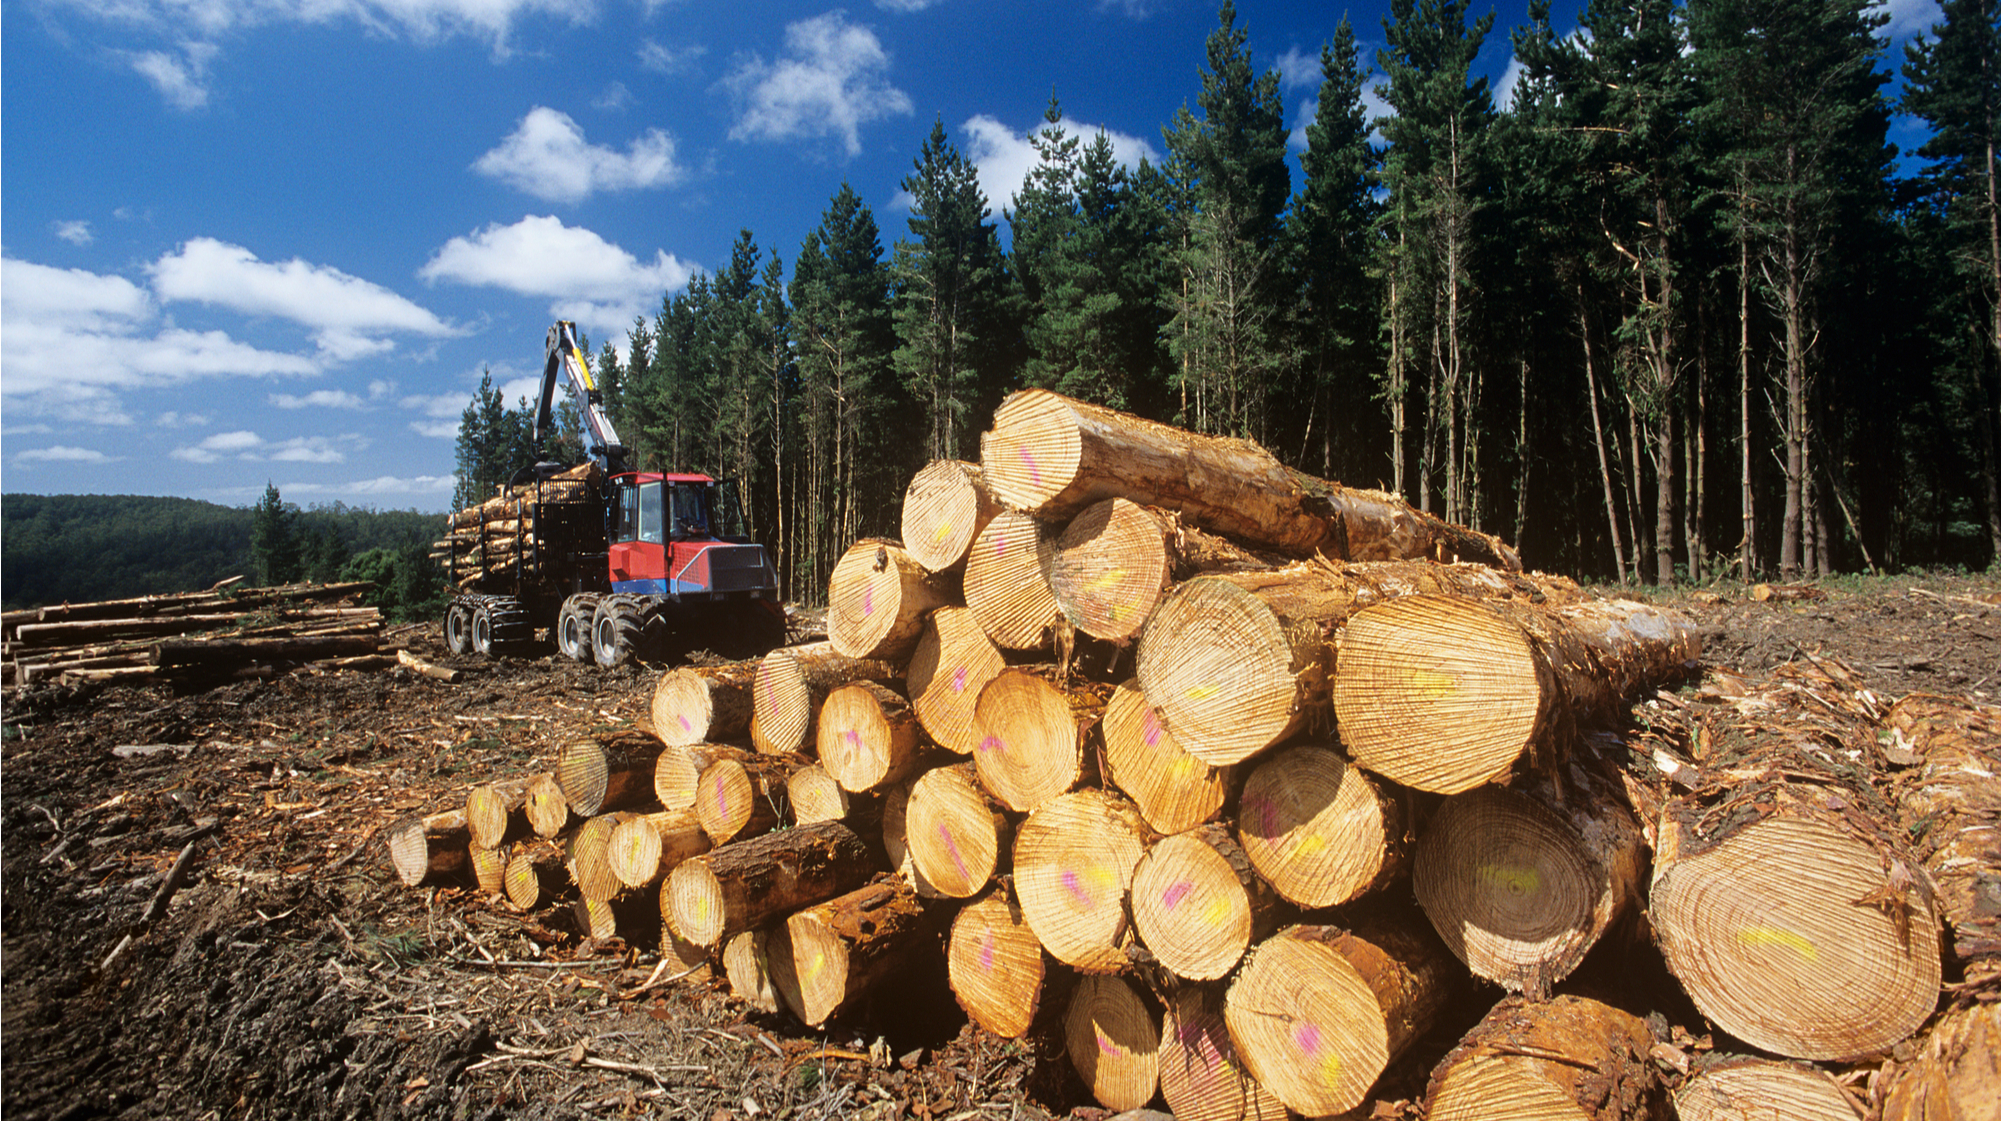 UAH 250 million in damages: the SBI suspects the leadership of the Carpathian Forest Farm of illegal logging